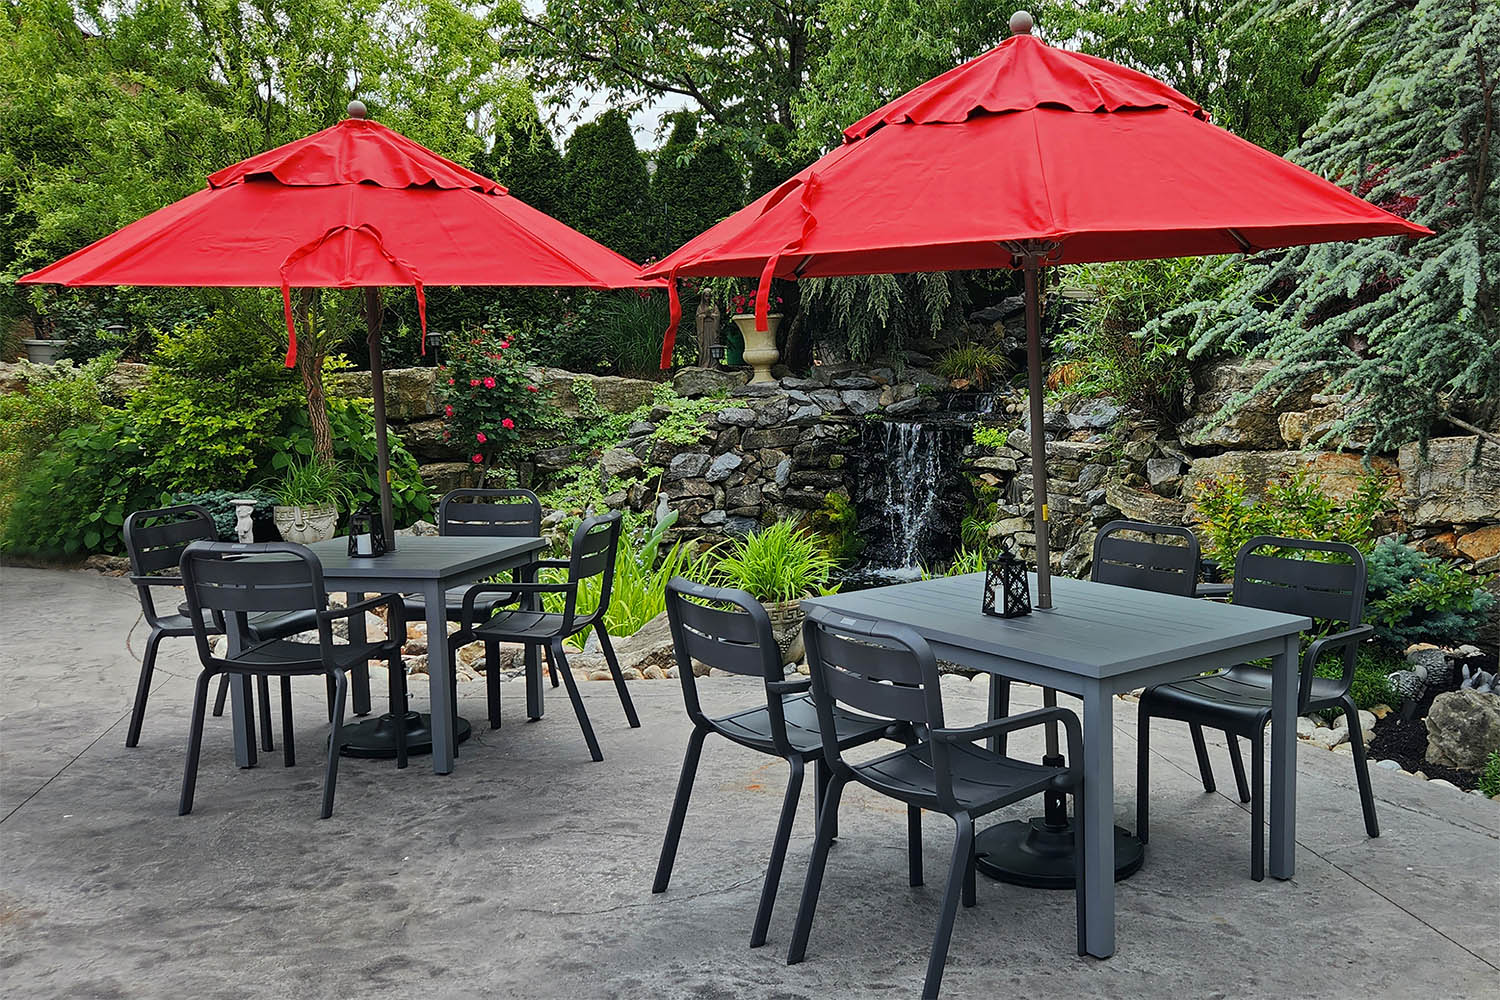 Upgrade your restaurant's outdoor dining with our stylish and functional umbrellas. This image highlights the perfect shade solution for your guests, adding sophistication and comfort. Enhance your dining space with our premium umbrellas, designed for restaurants looking to elevate their al fresco experience.